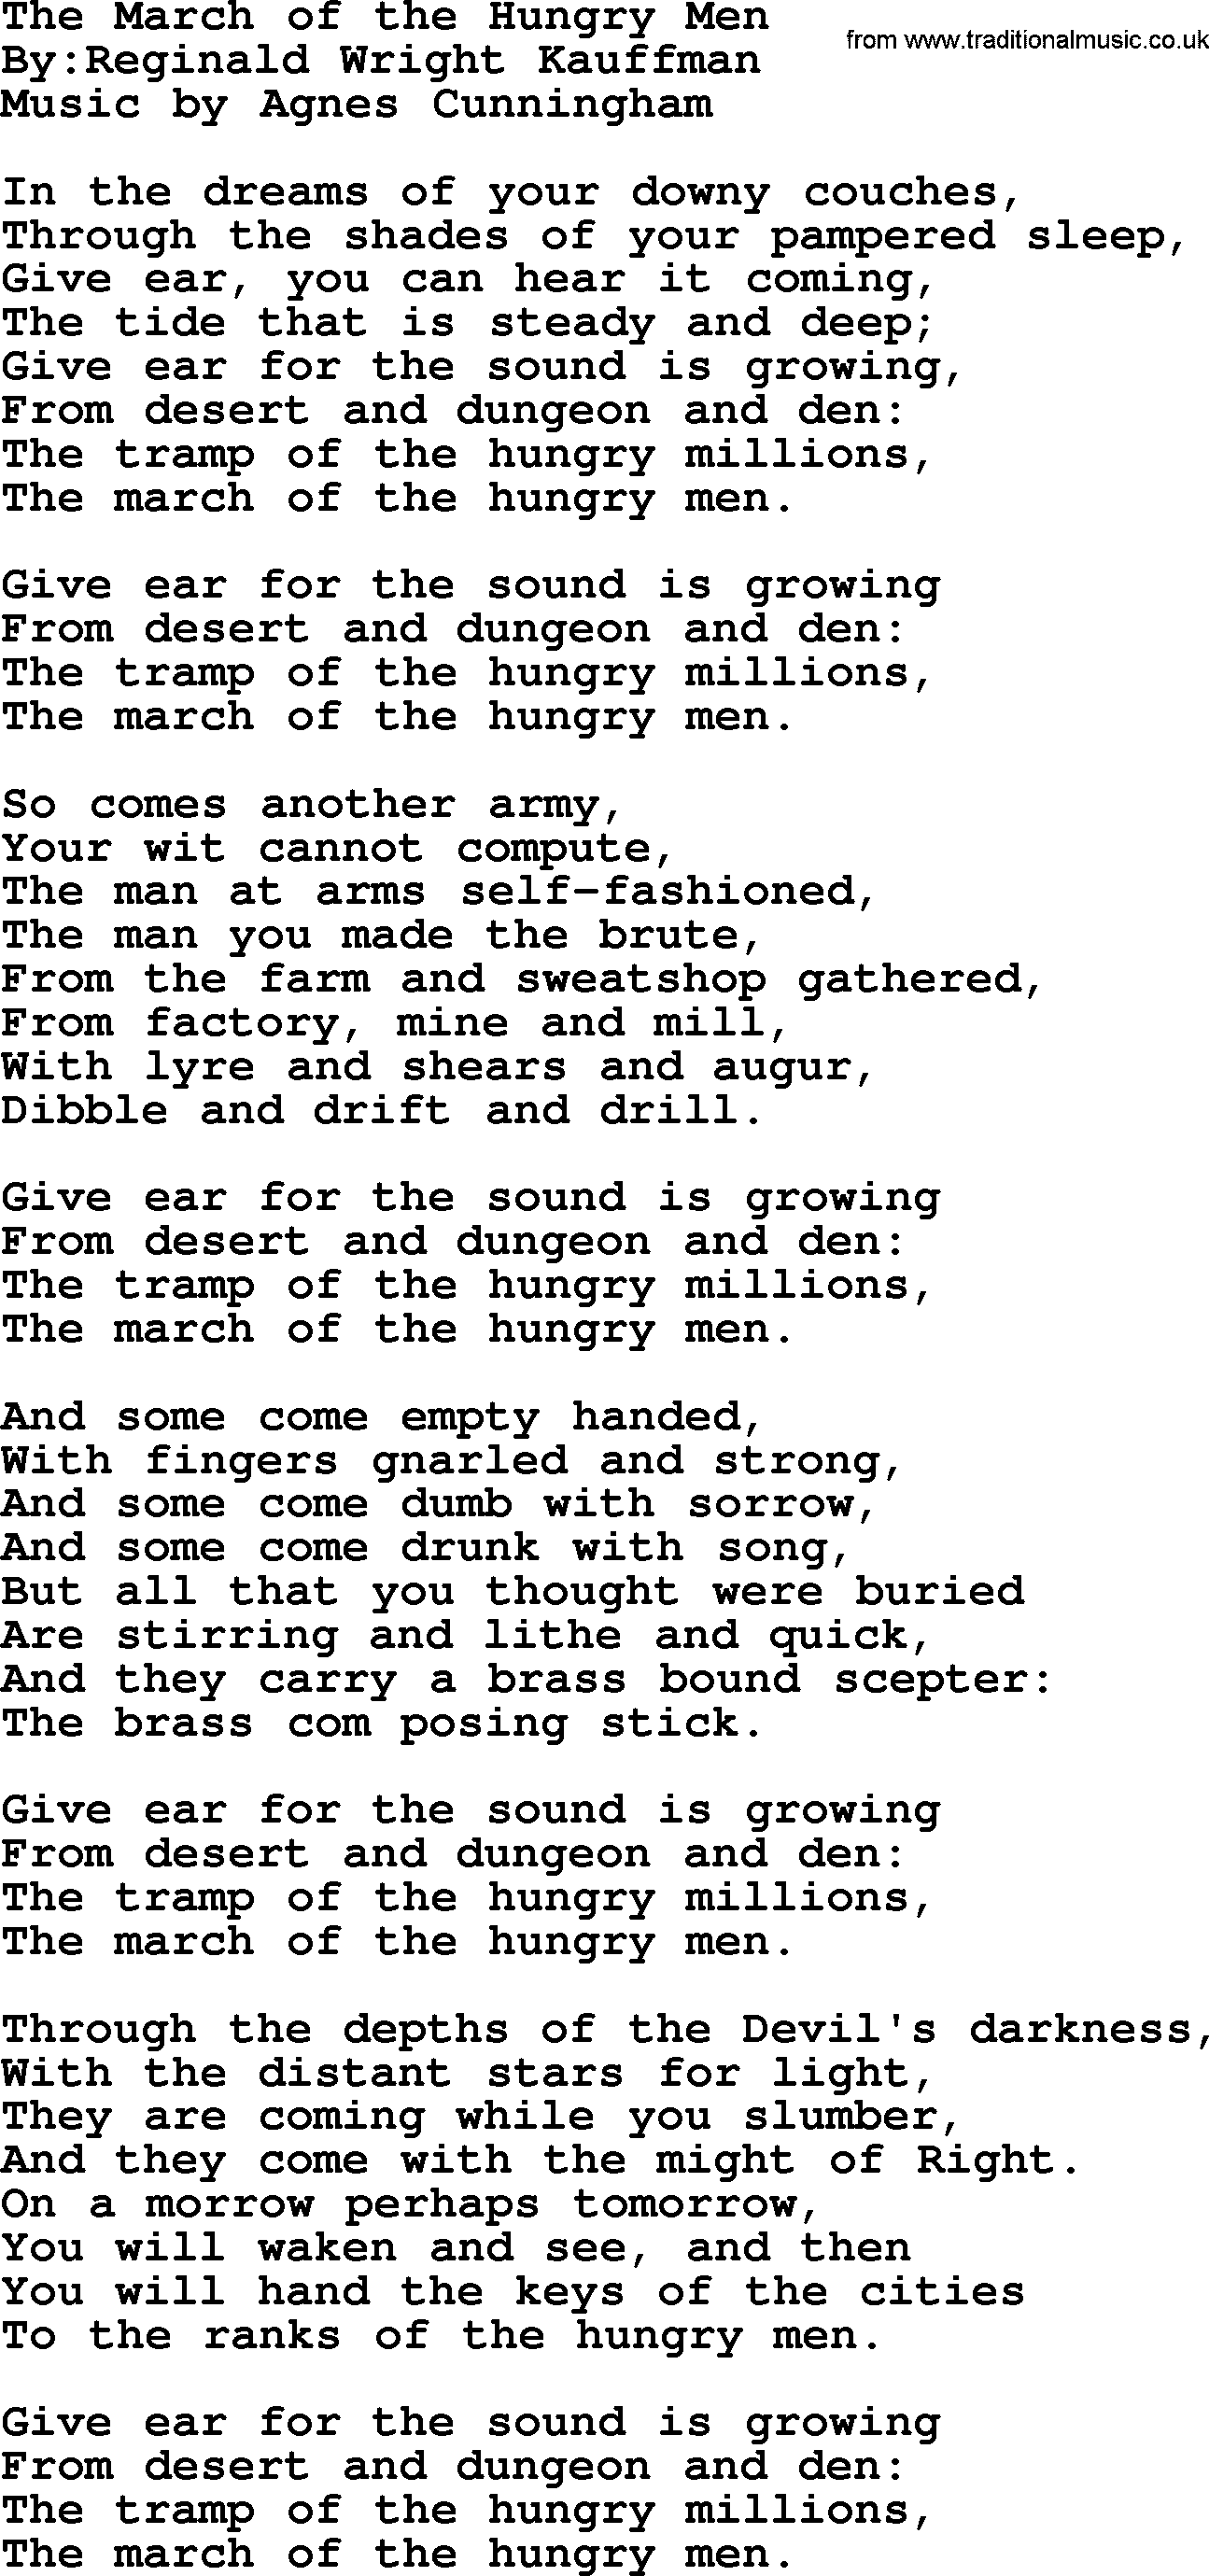 Political, Solidarity, Workers or Union song: The March Of The Hungry Men, lyrics